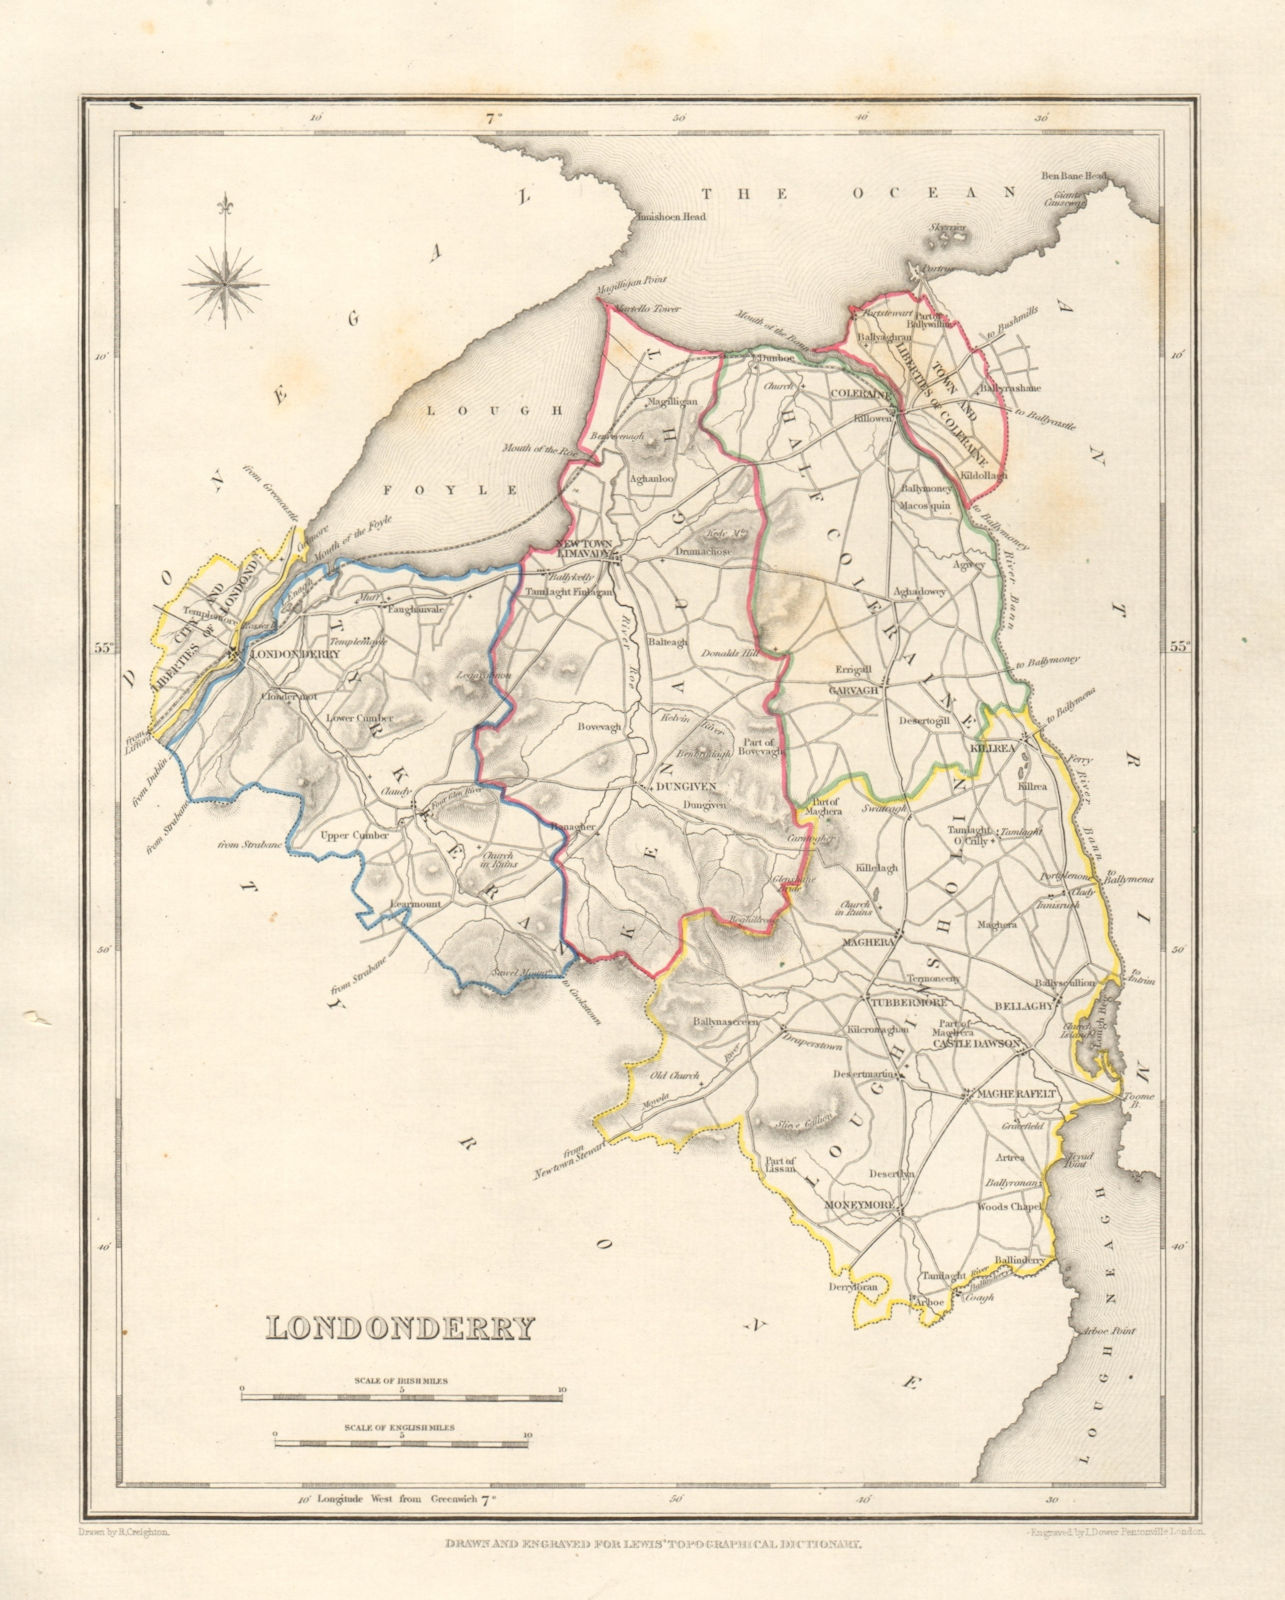 COUNTY LONDONDERRY antique map for LEWIS by DOWER & CREIGHTON. Ulster 1846